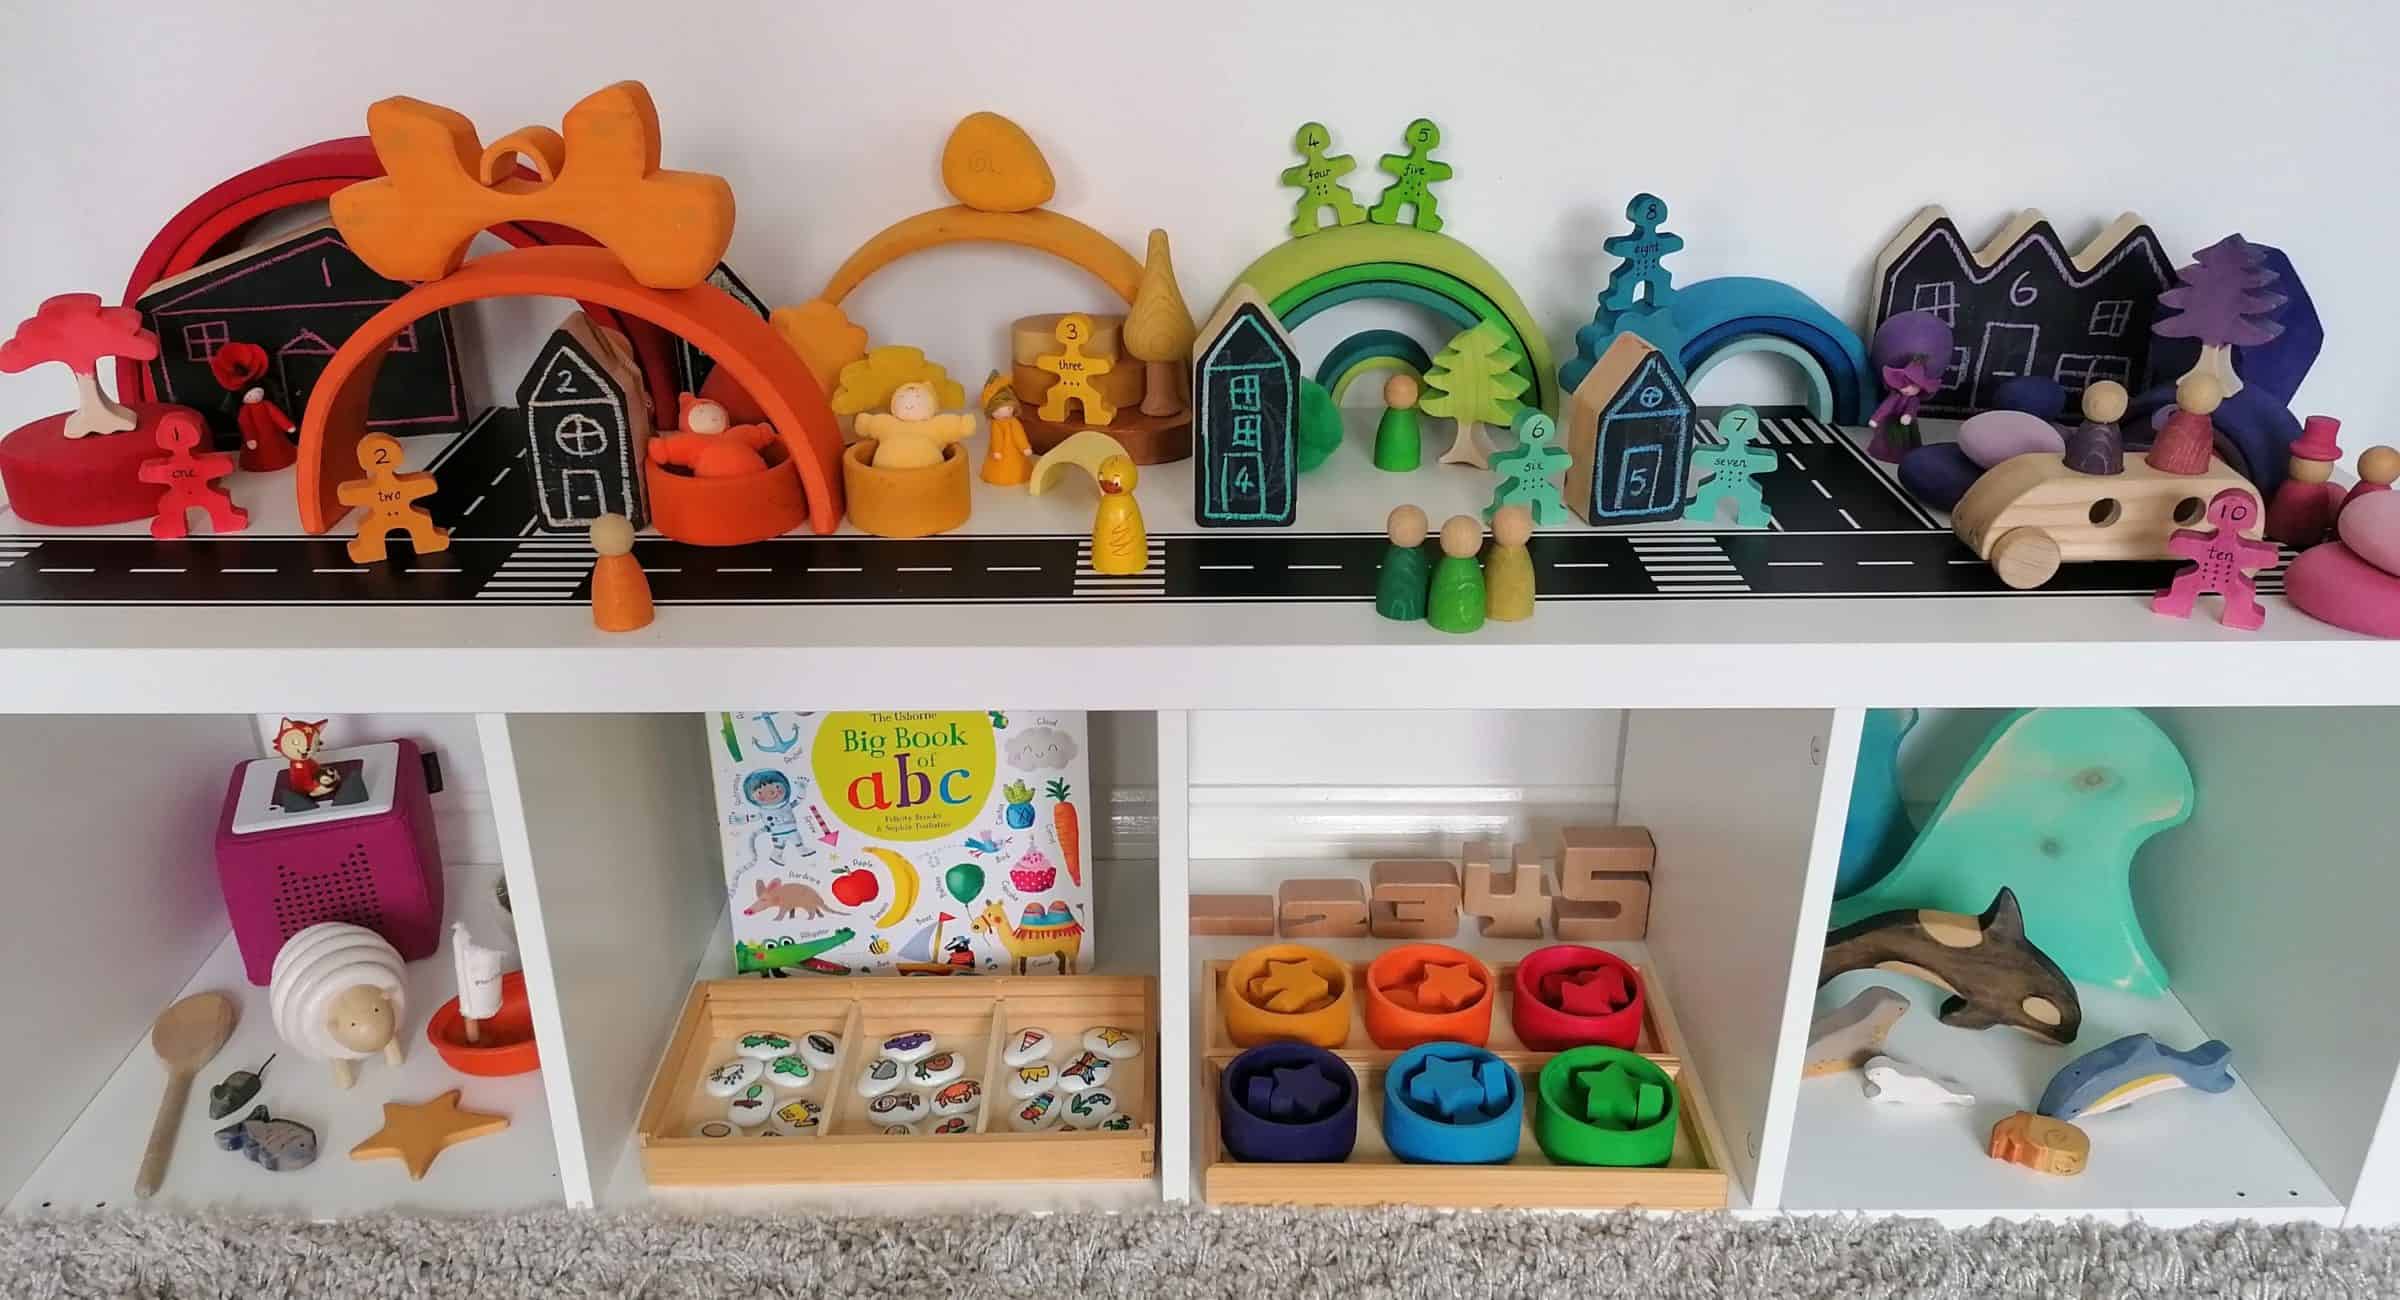 Toy Shelfie - Toy rotation - toy organisation - toy organization - top toys 2 year old and 3 year old - perpetual calendar - loose parts - open ended toys - traditional tales - three little pigs - waldorf inspired